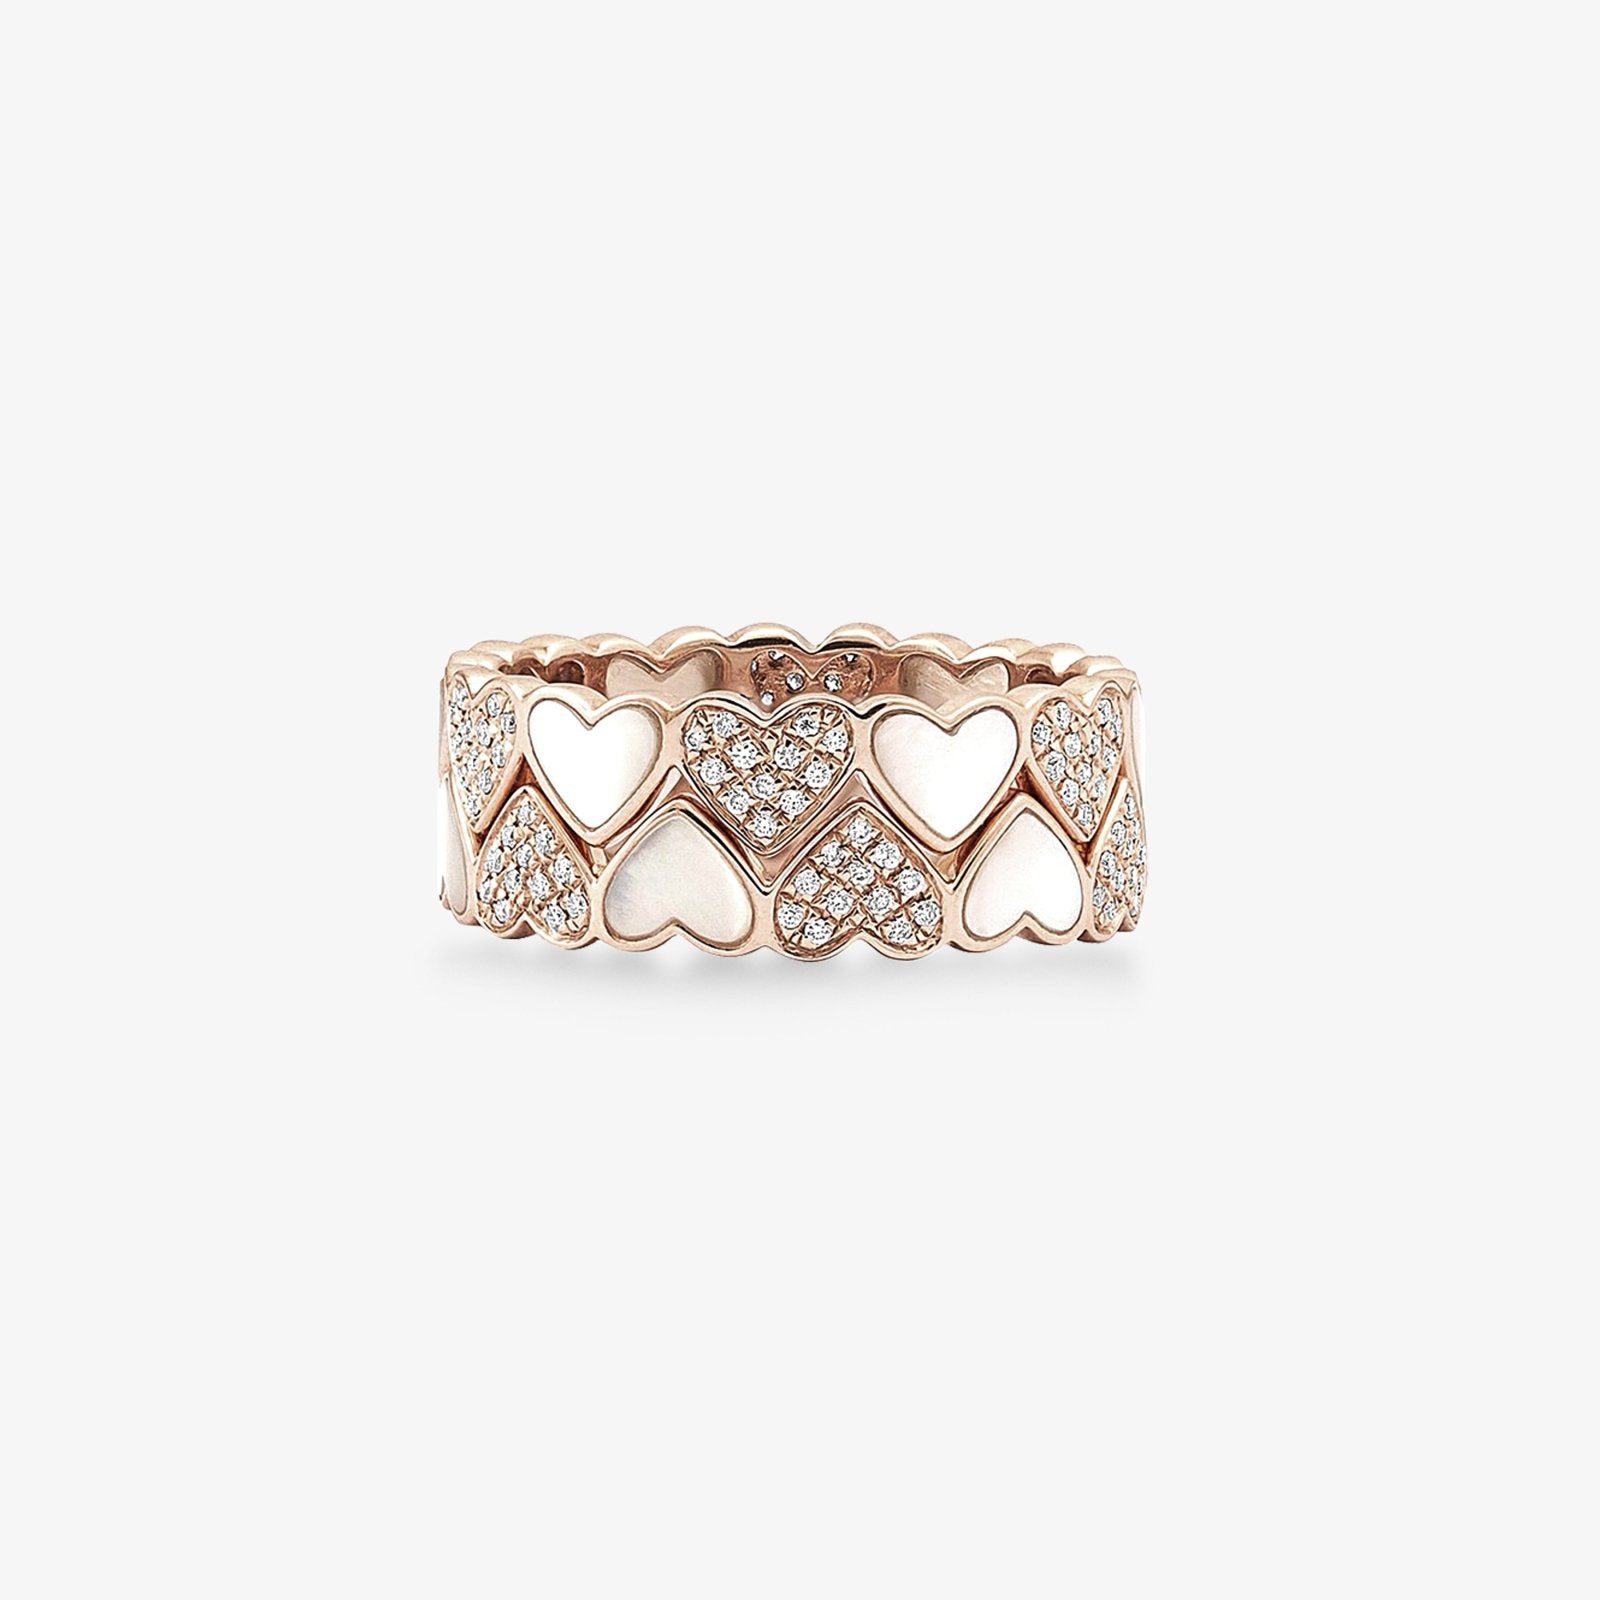 Alternating Diamond and Mother of Pearl Heart Eternity Band Rings Estella Collection #product_description# 17210 14k Band Birthstone #tag4# #tag5# #tag6# #tag7# #tag8# #tag9# #tag10#